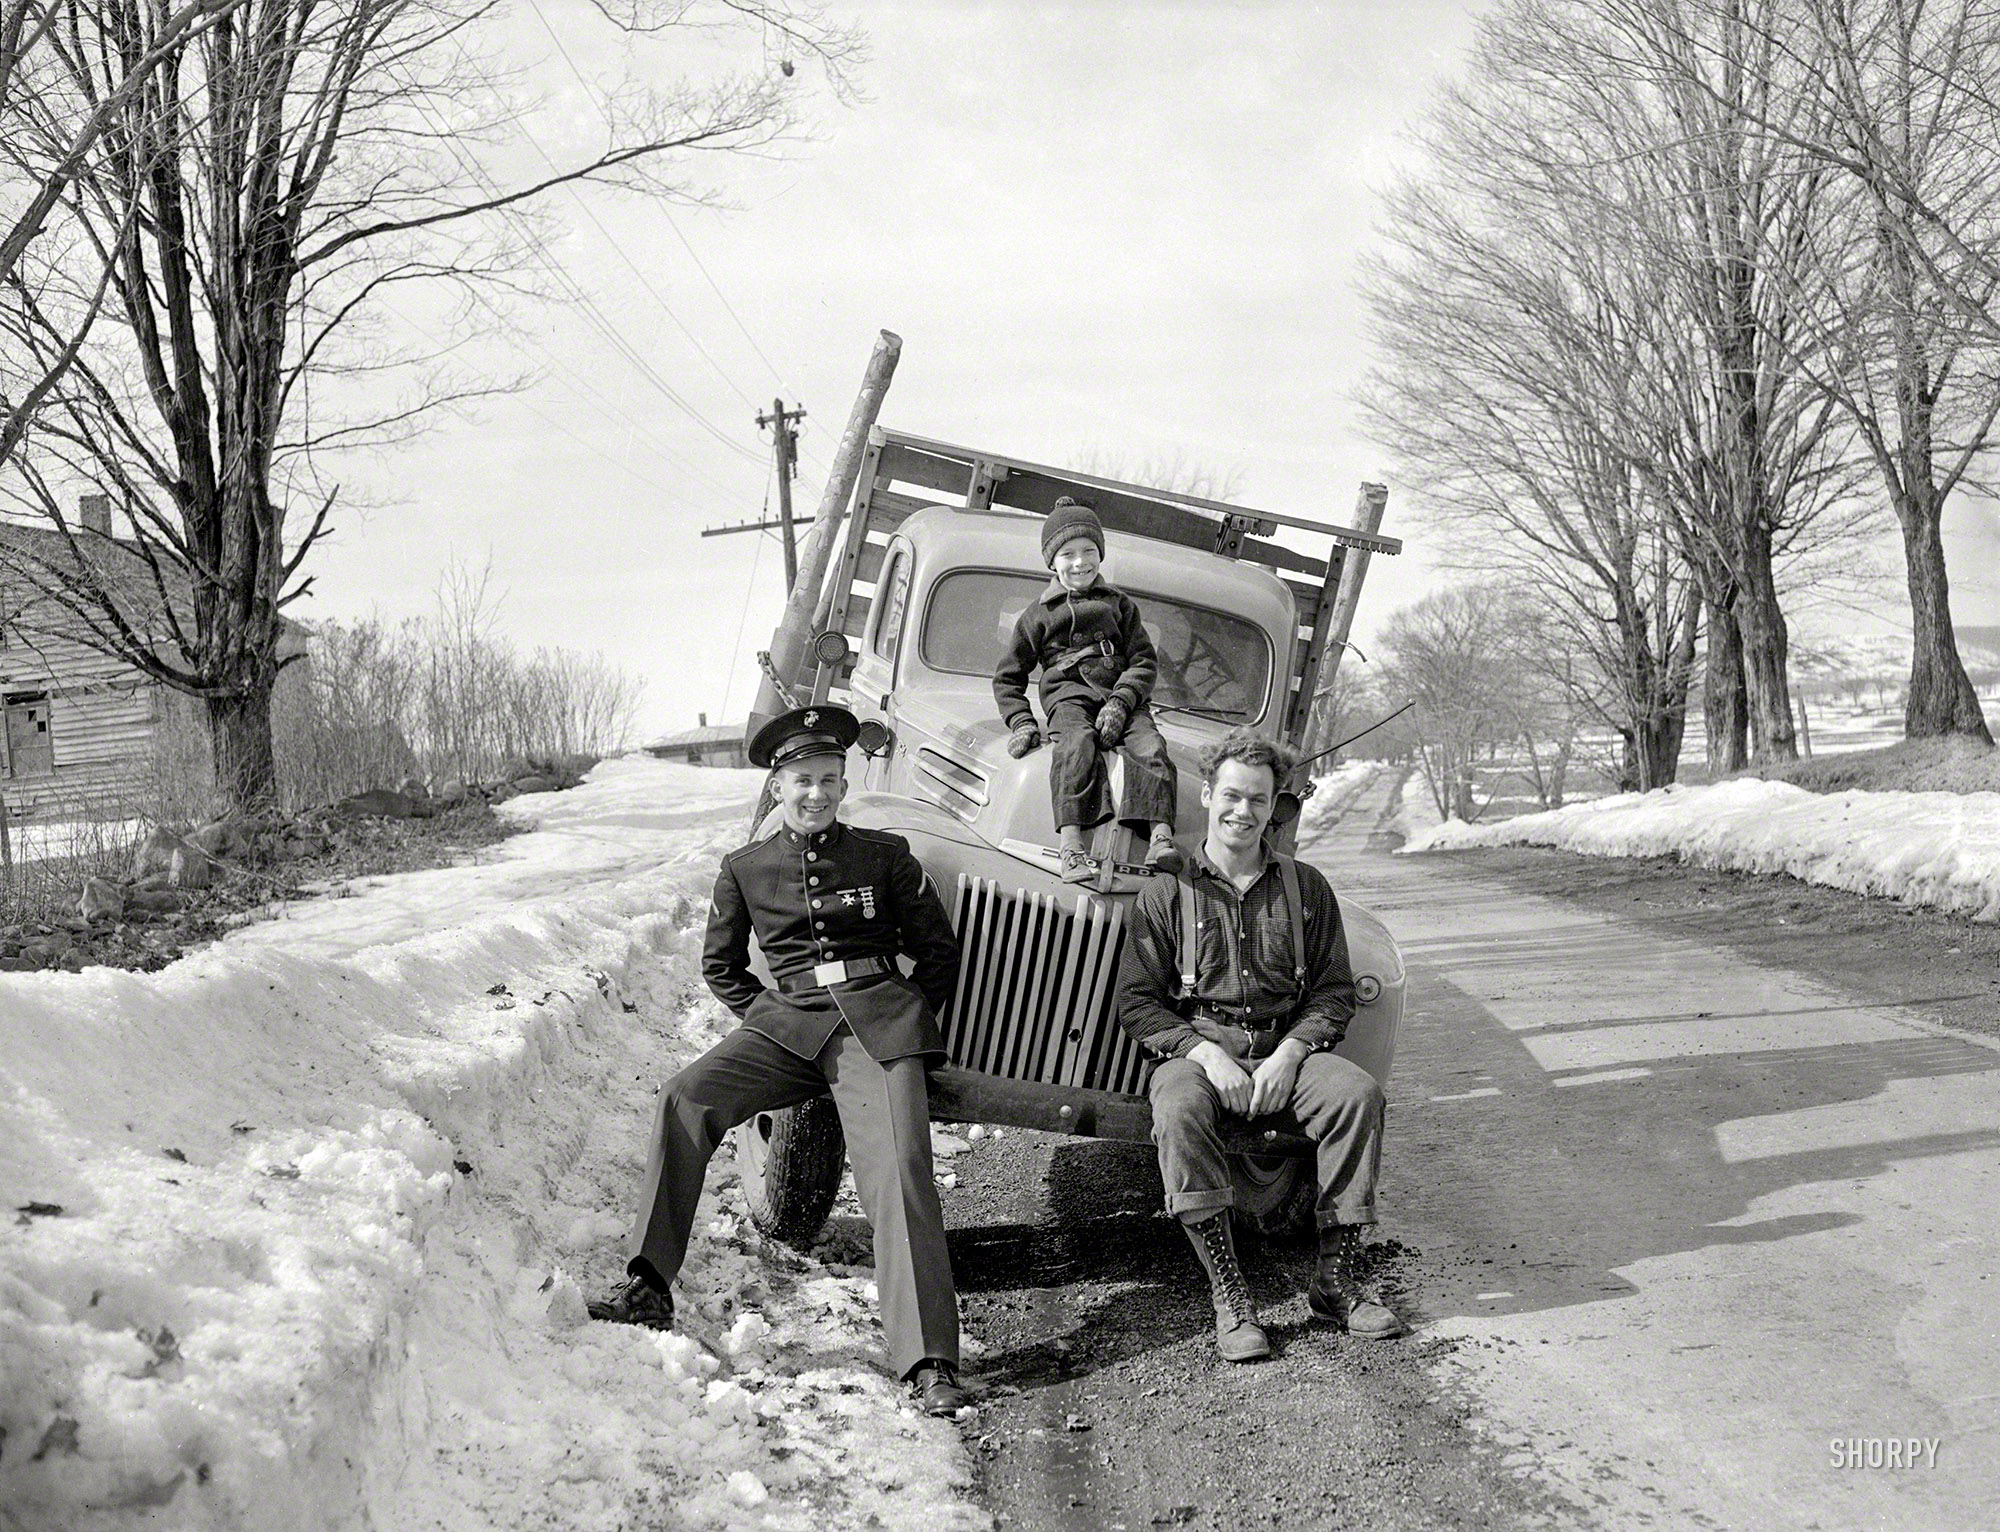 &nbsp; &nbsp; &nbsp; &nbsp; UPDATE: The photographer is Tony Linck, whose work appeared in Life magazine. The location is probably around Utica, New York.
From somewhere in New England in the 1940s comes this uncaptioned 4x5 Agfa negative of three happy guys and their Ford truck. View full size.